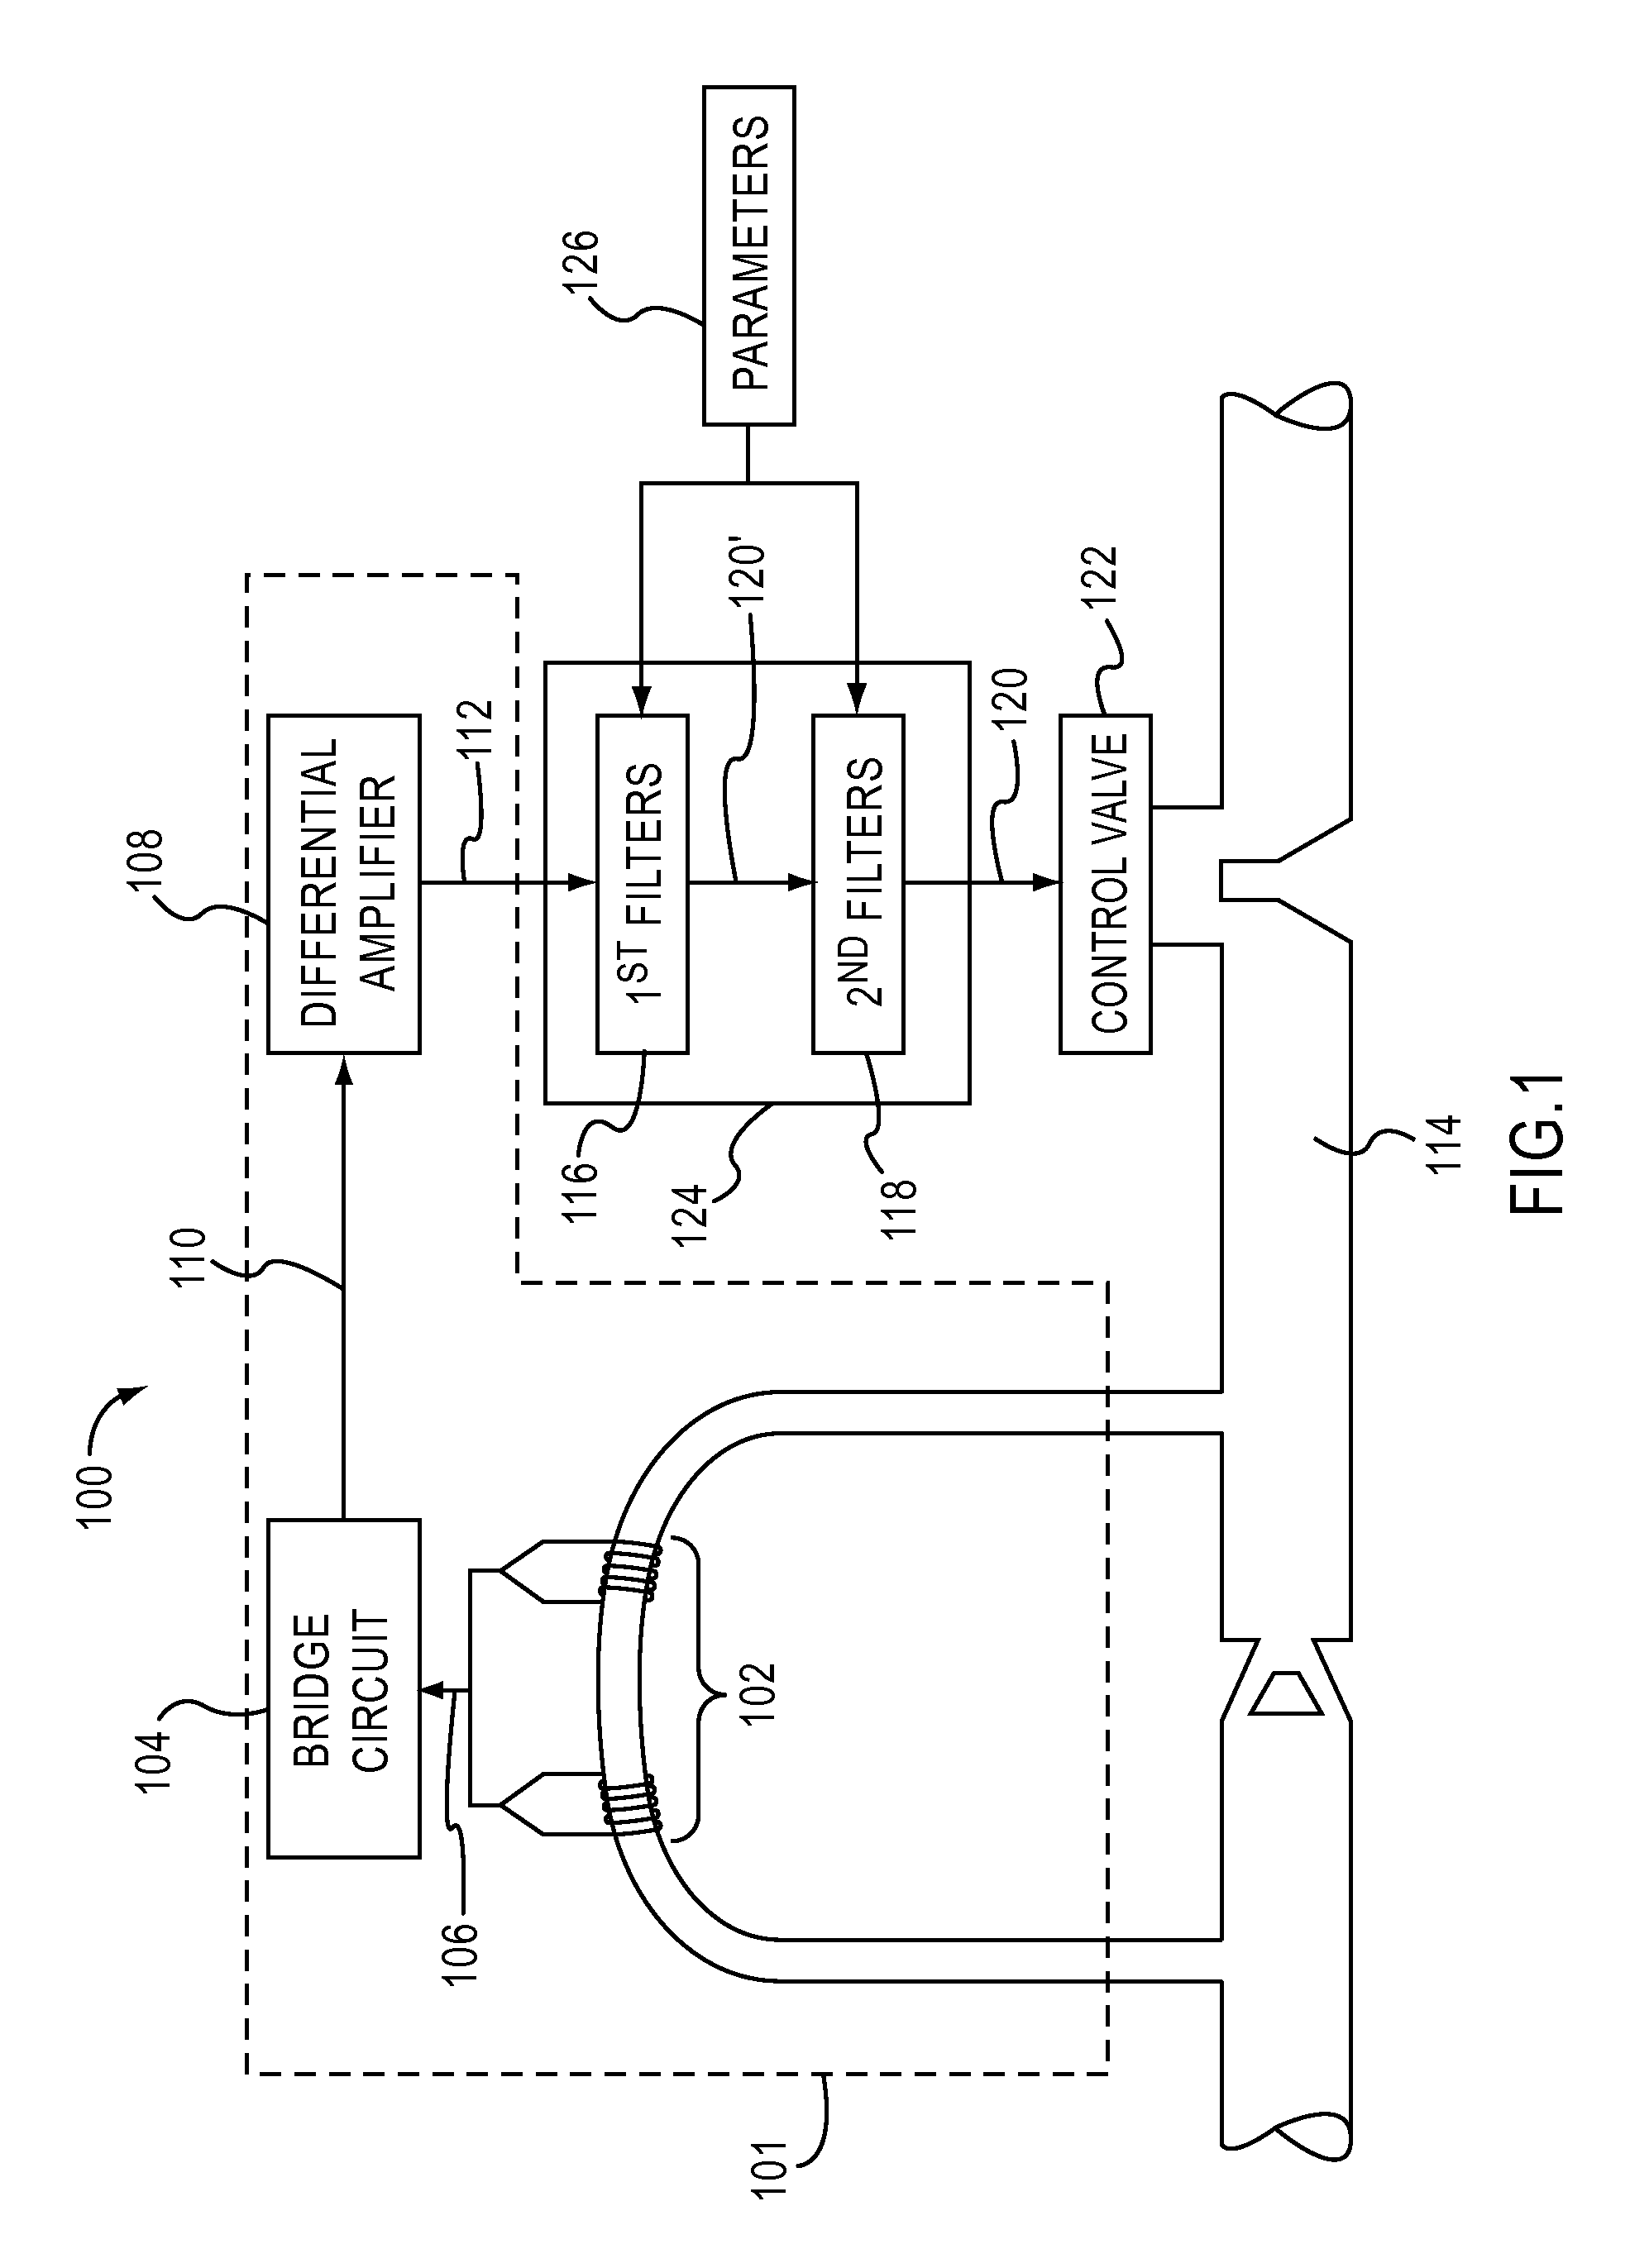 Thermal mass flow sensor with improved response across fluid types